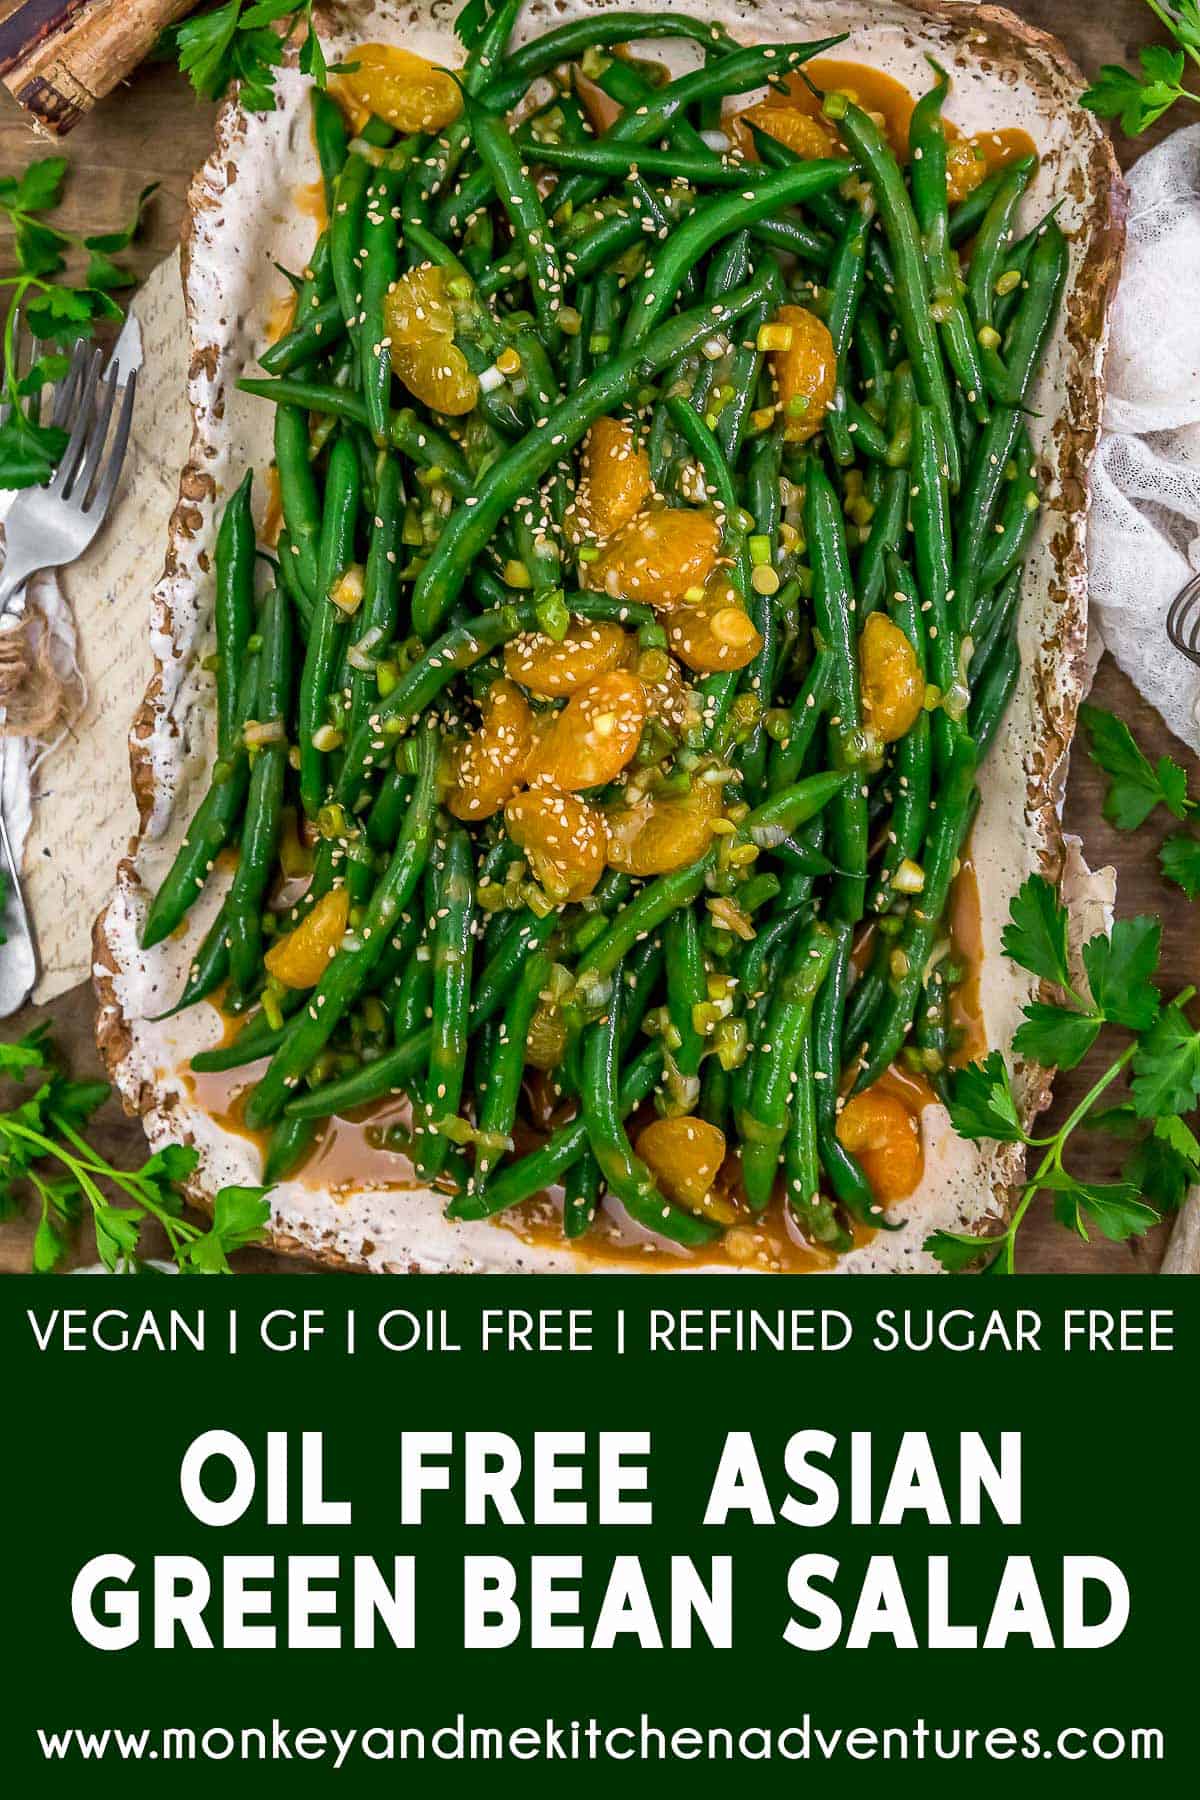 Oil Free Asian Green Bean Salad with text description